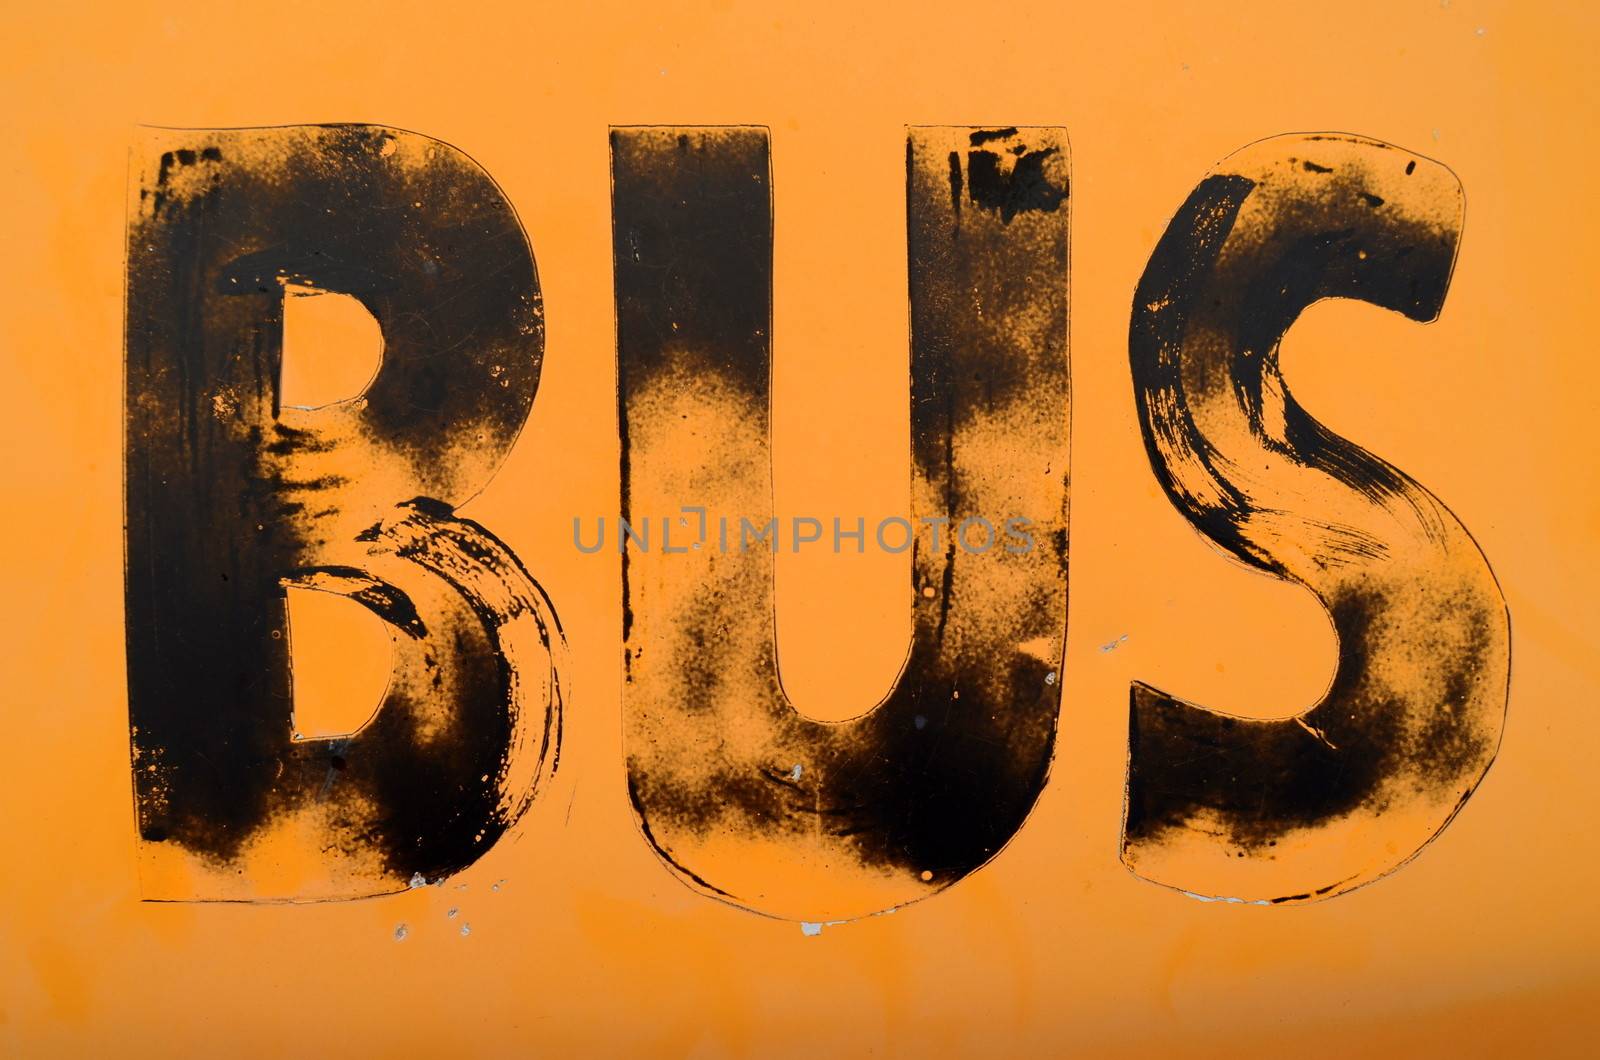 Urban Decay Image Of A Grungy Public Transport Sign For A School Bus